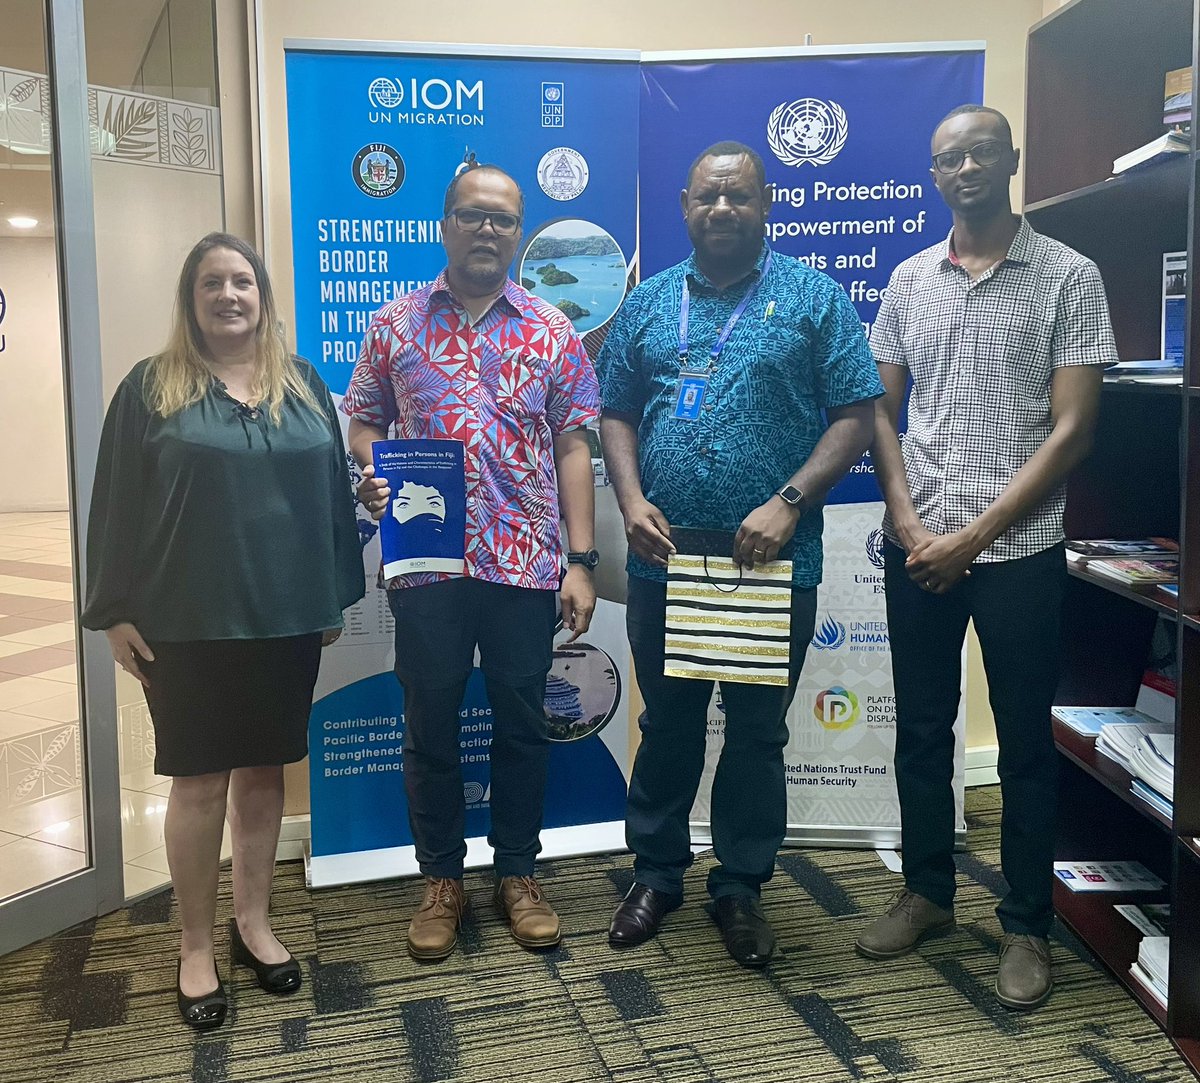 IOM Fiji Chief of Mission met with the World Vision International team from Fiji and Solomon Islands and discussed areas of cooperation on disaster resilience, climate change, GBV and protection of women and children. IOM looks forward to working closely with WVI in the Pacific